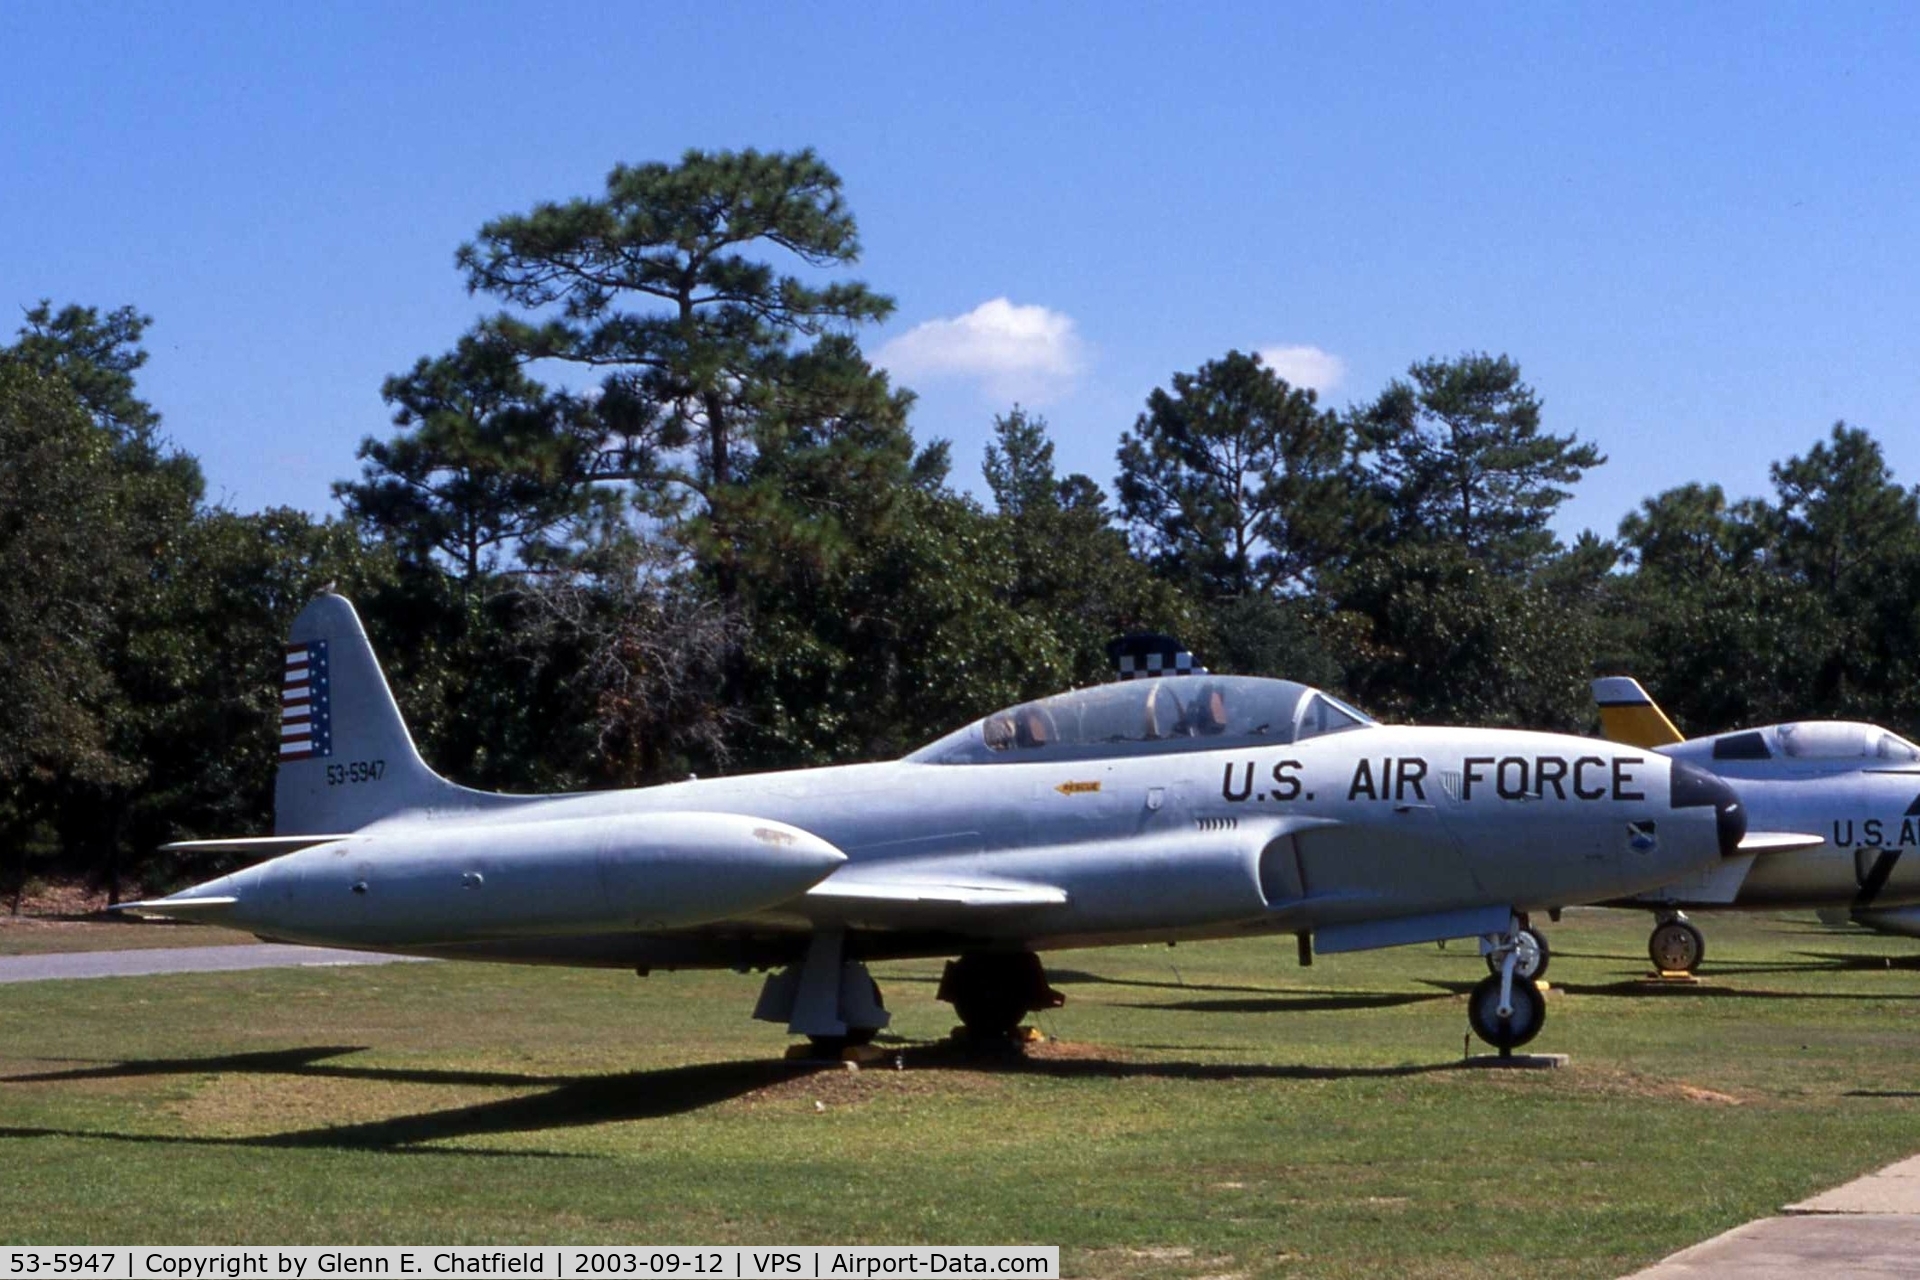 53-5947, 1953 Lockheed T-33A-1-LO Shooting Star C/N 580-9423, T-33A at the USAF Armament Museum